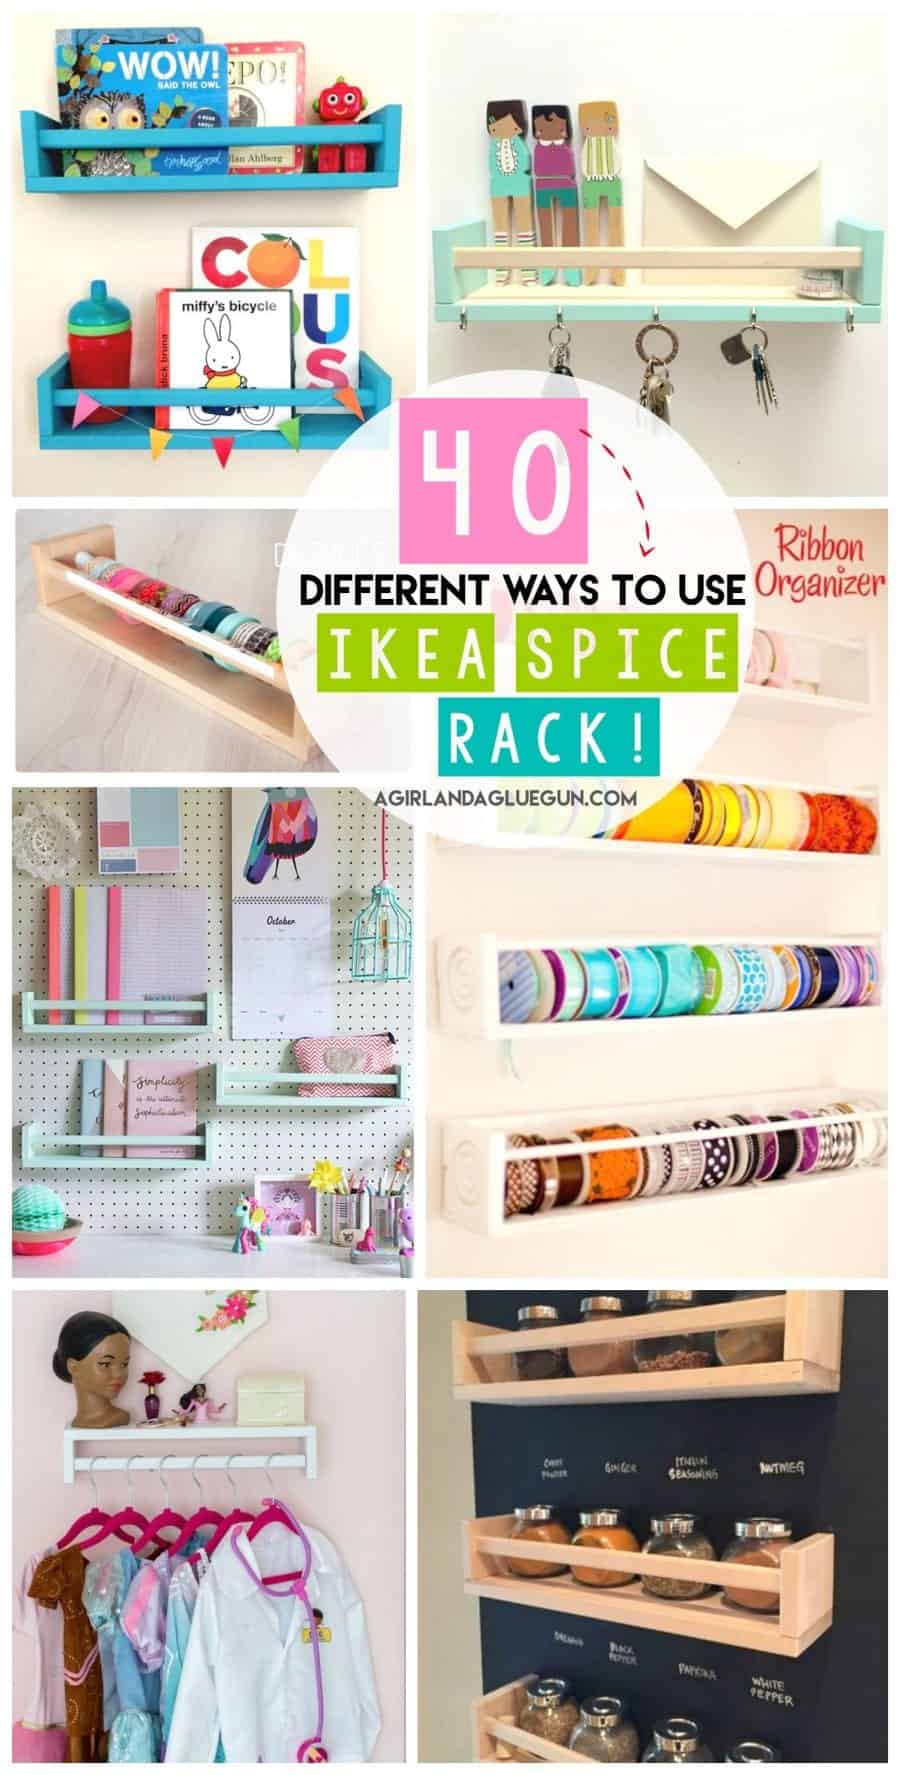 40 different ways to use ikea spice rack so many clever organizing hacks!